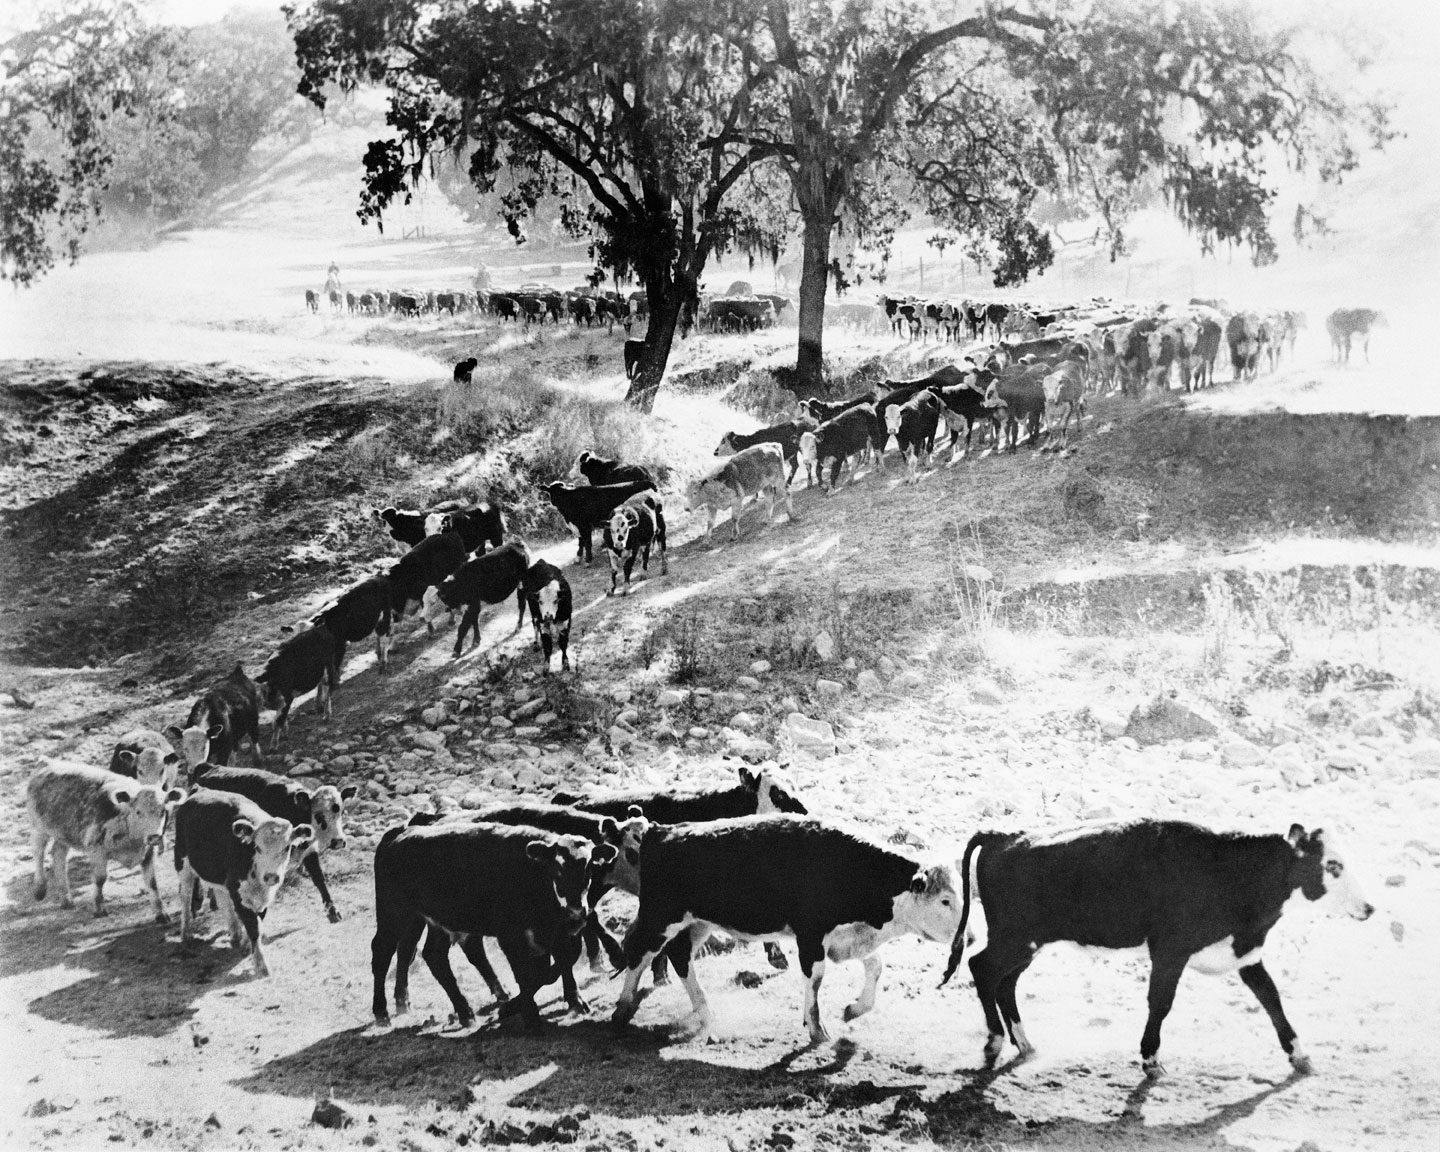 historical photo of cattle walking a path